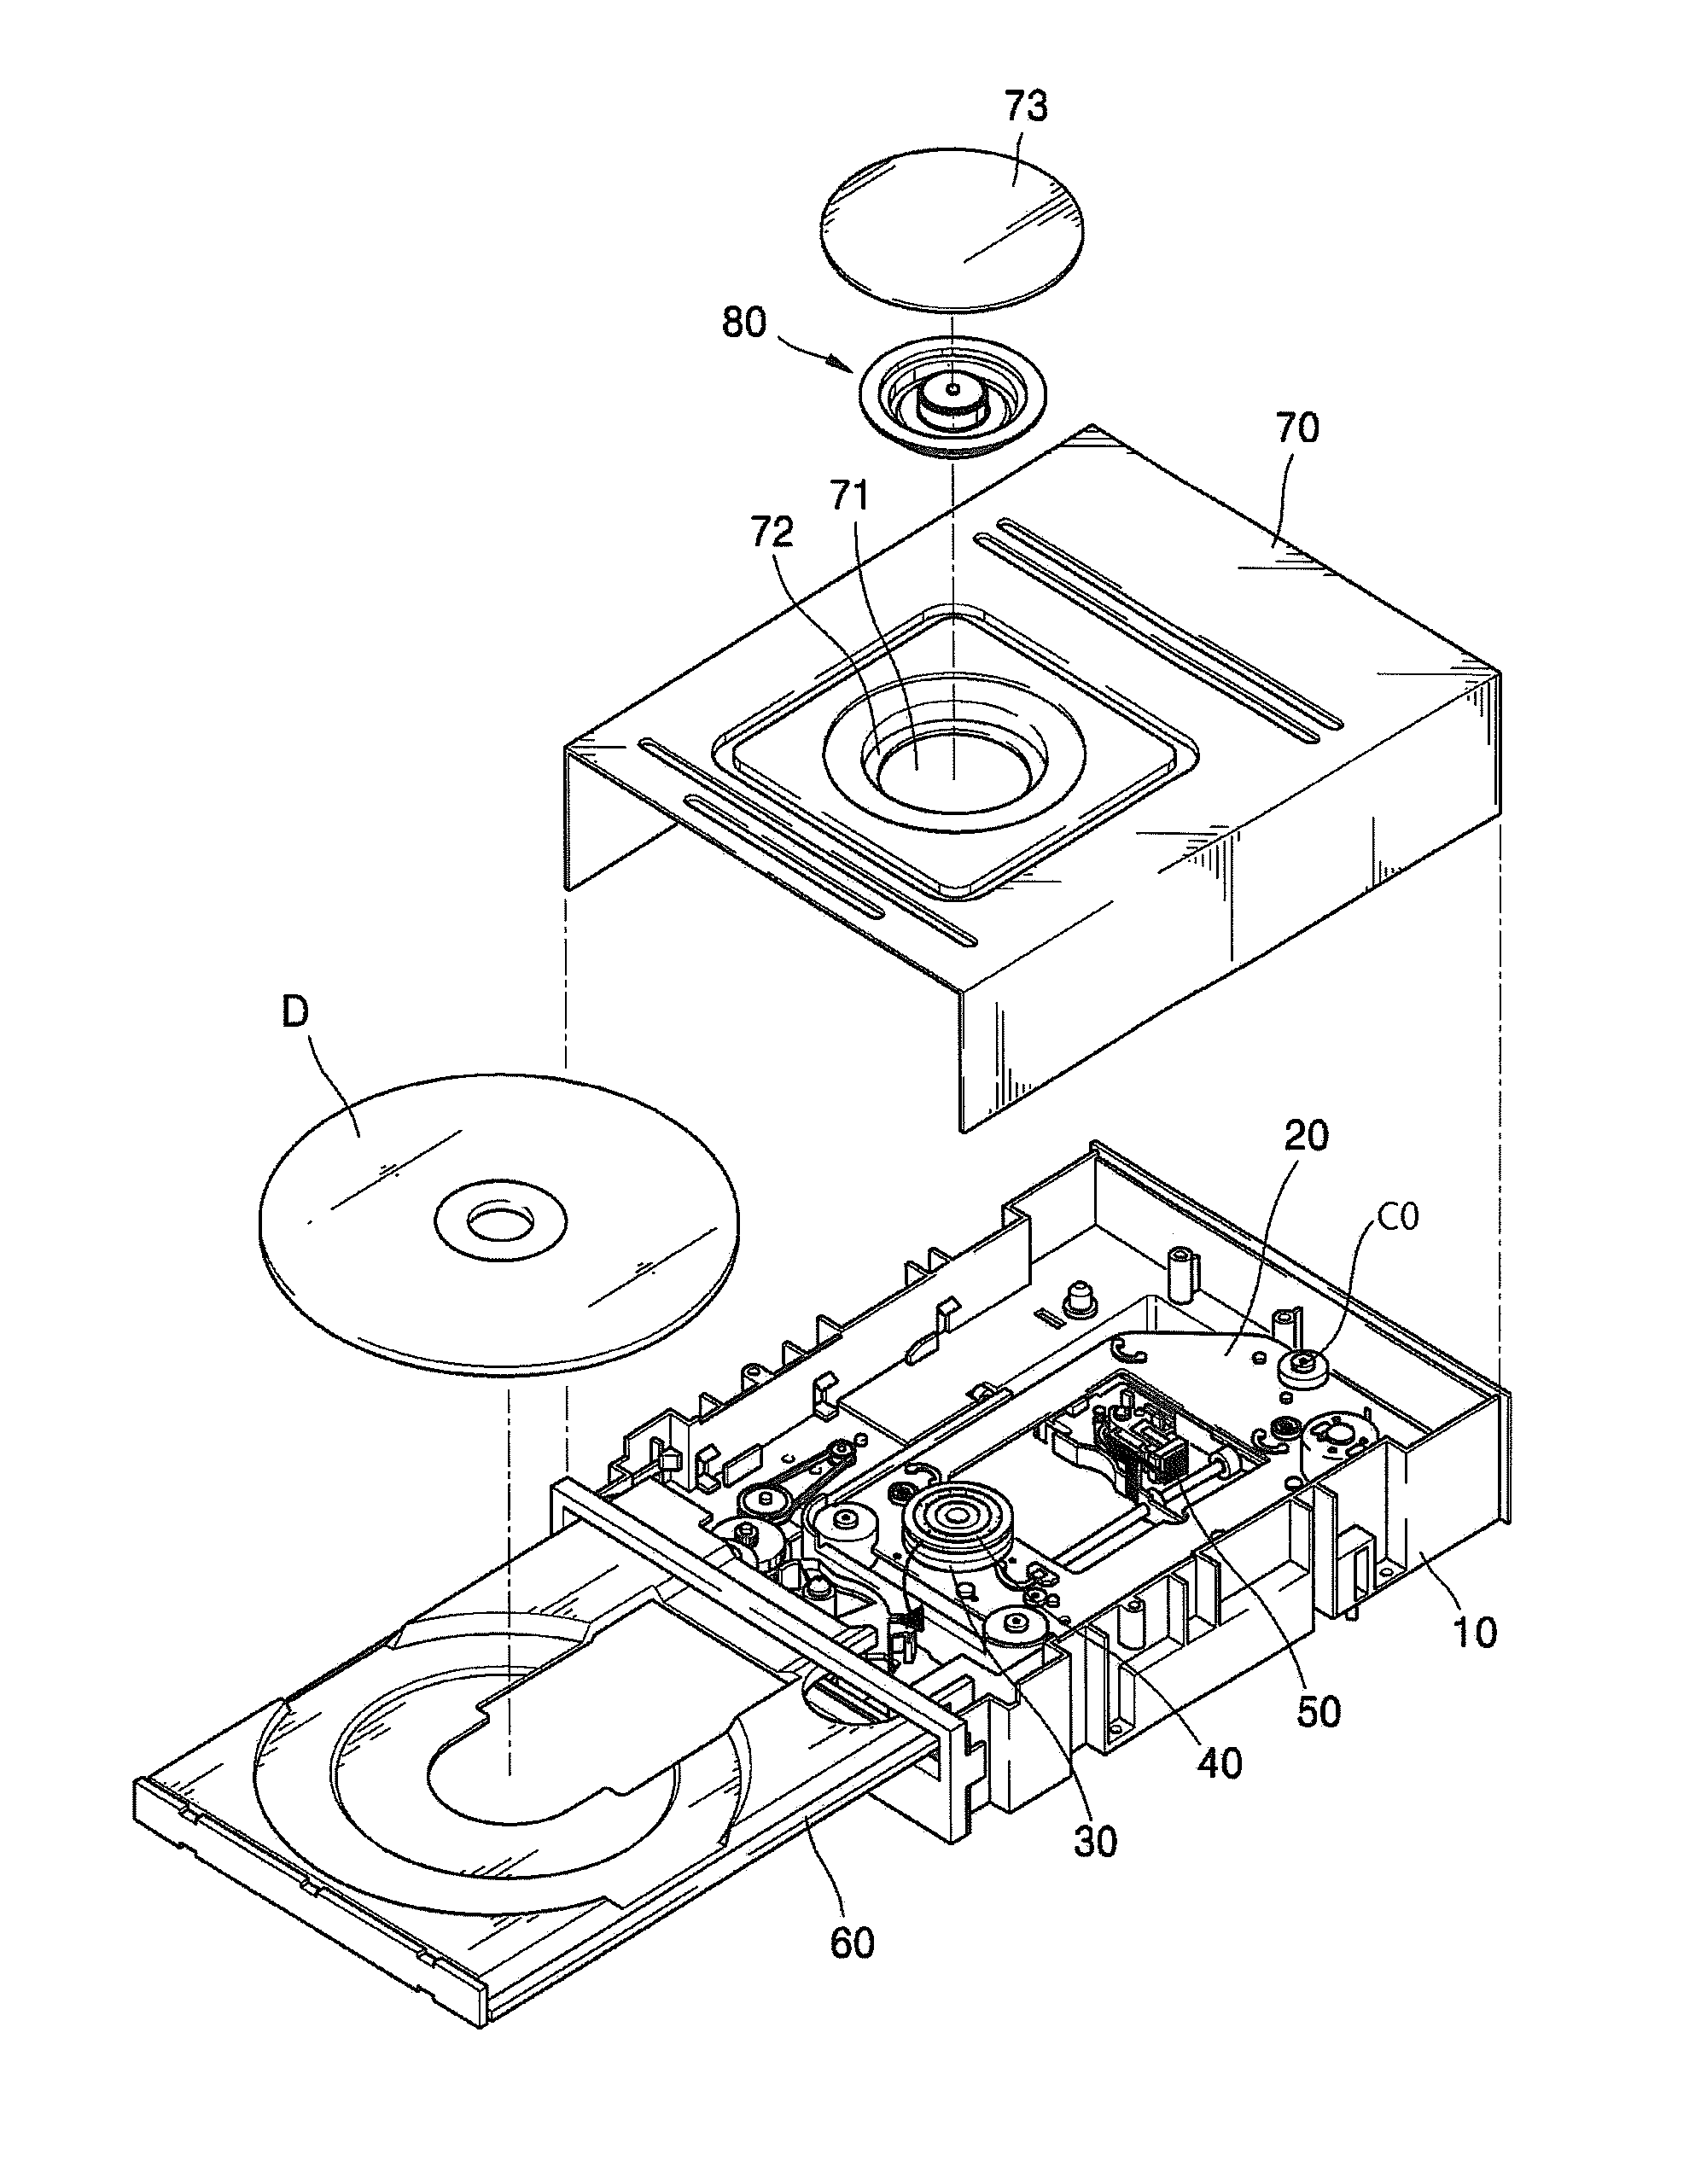 Optical disk drive device